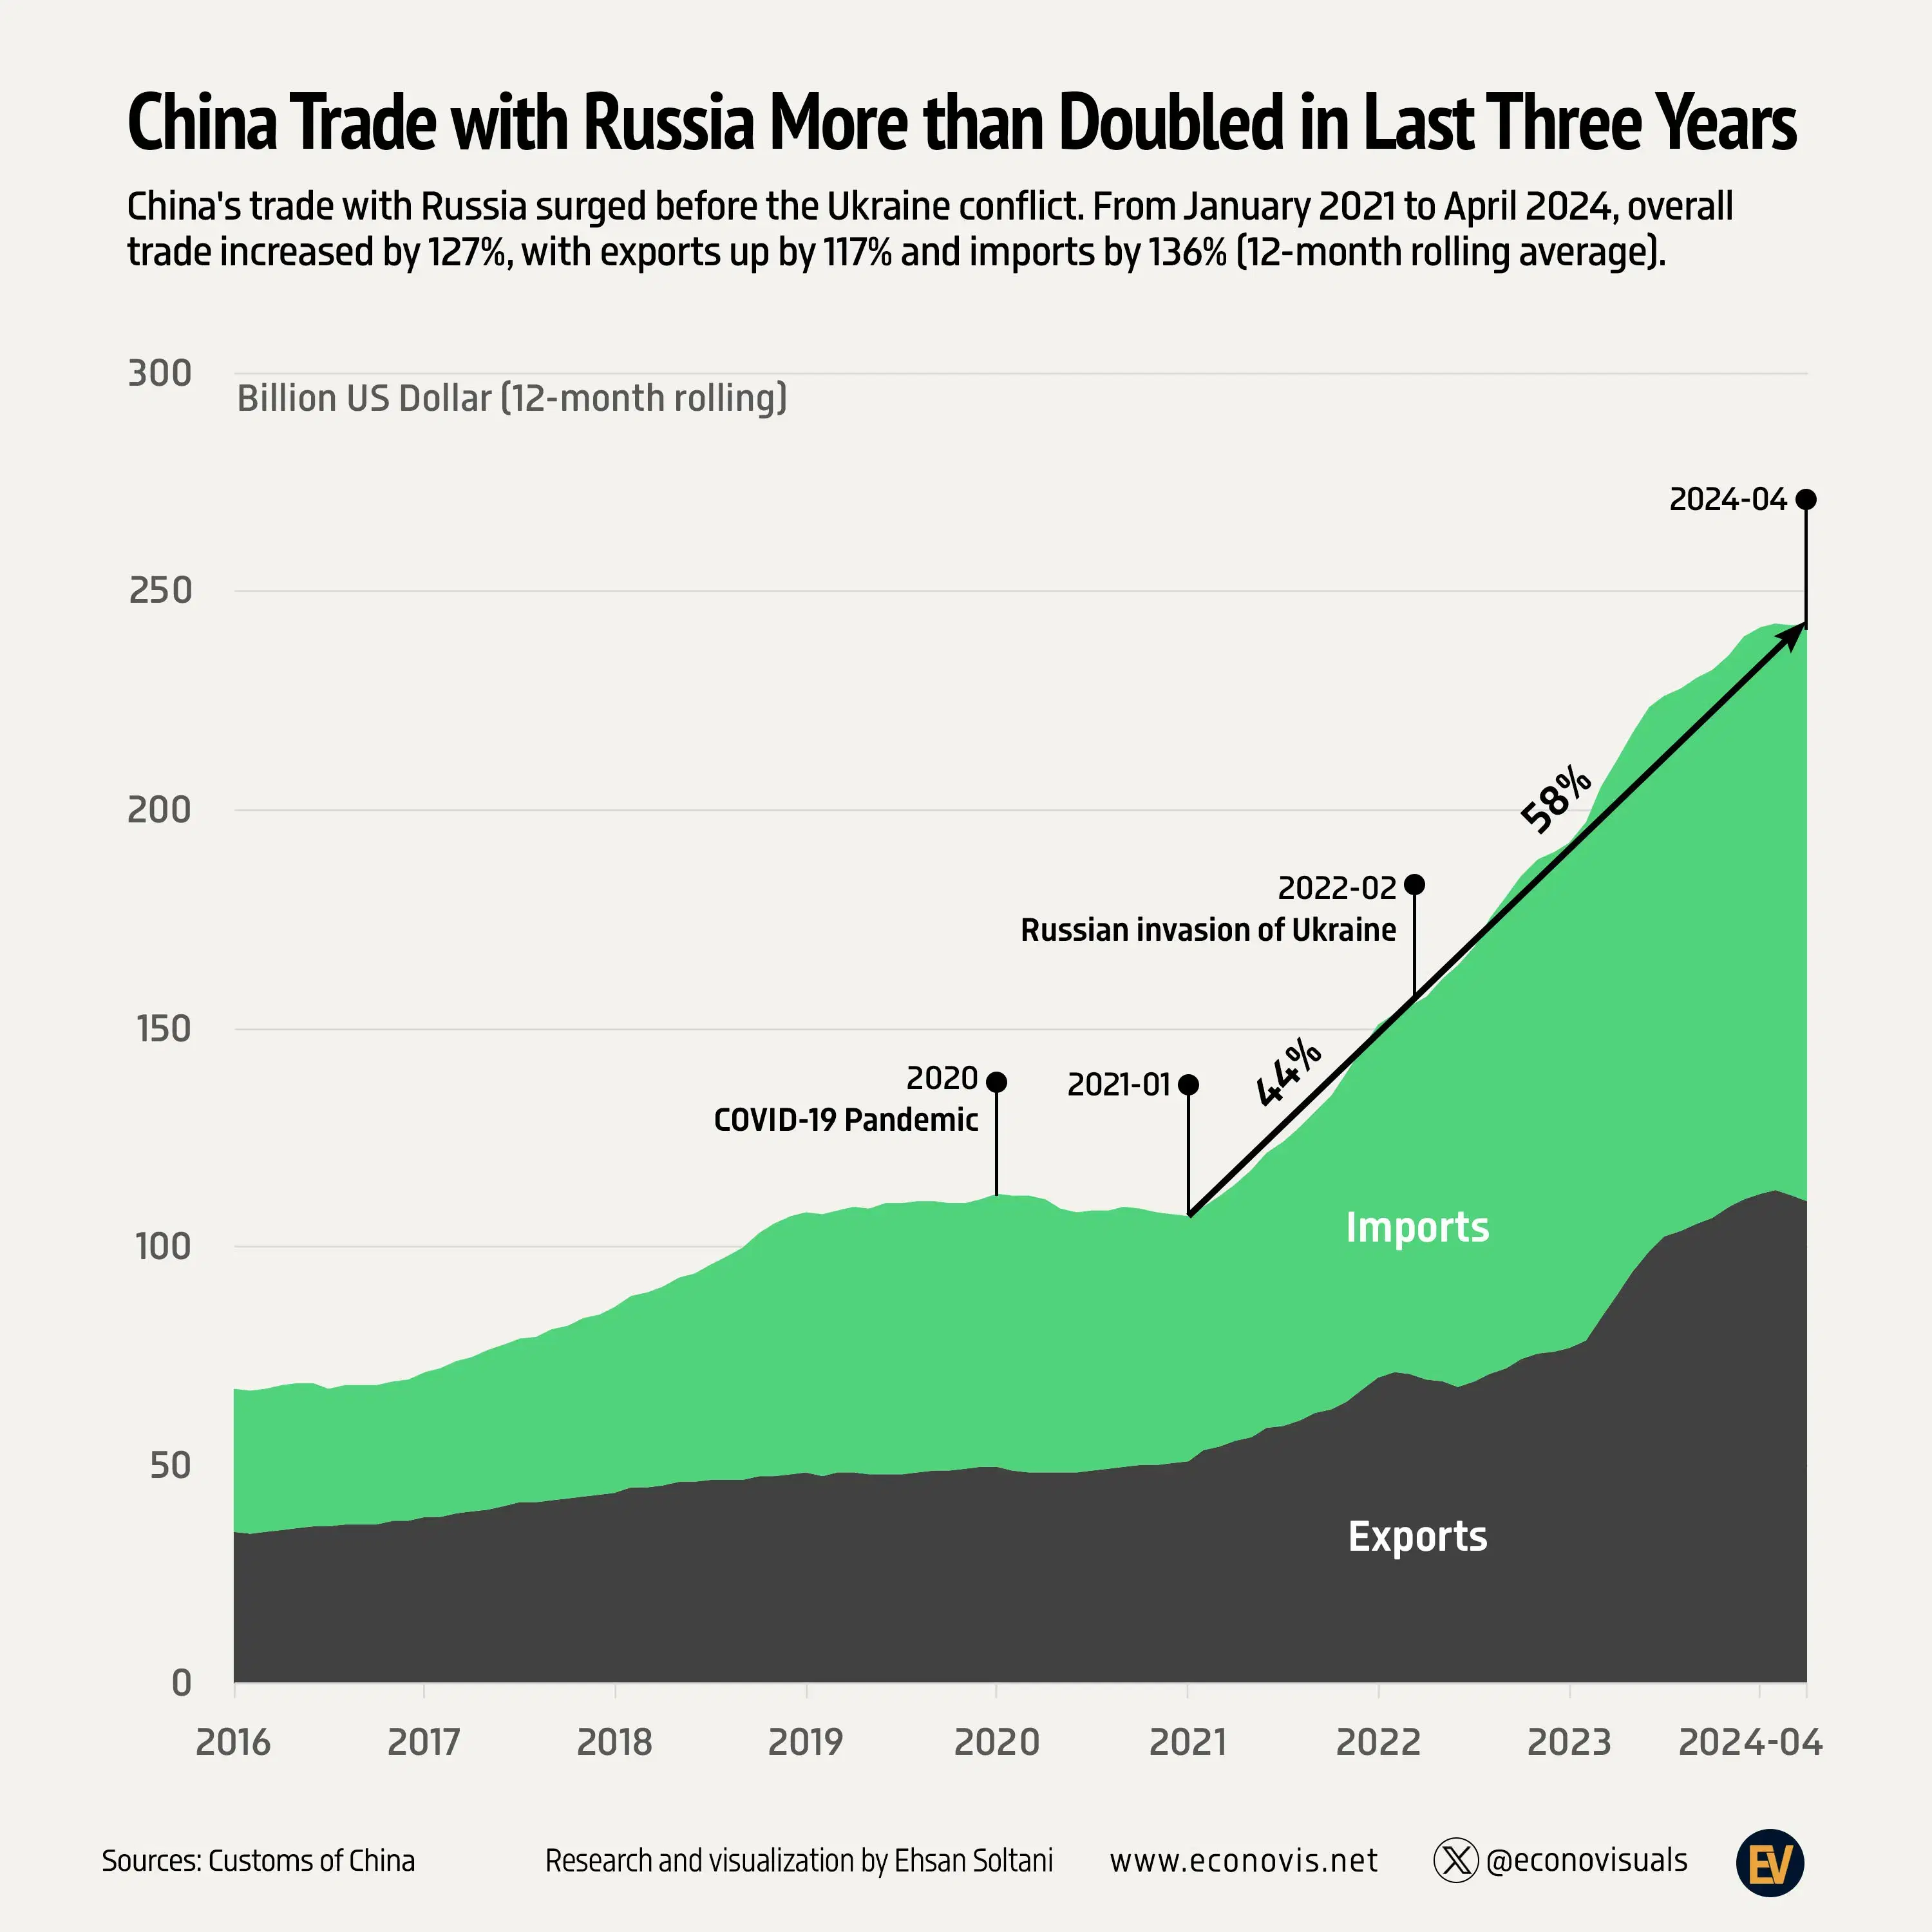 China Trade with Russia More than Doubled in Last Three Years